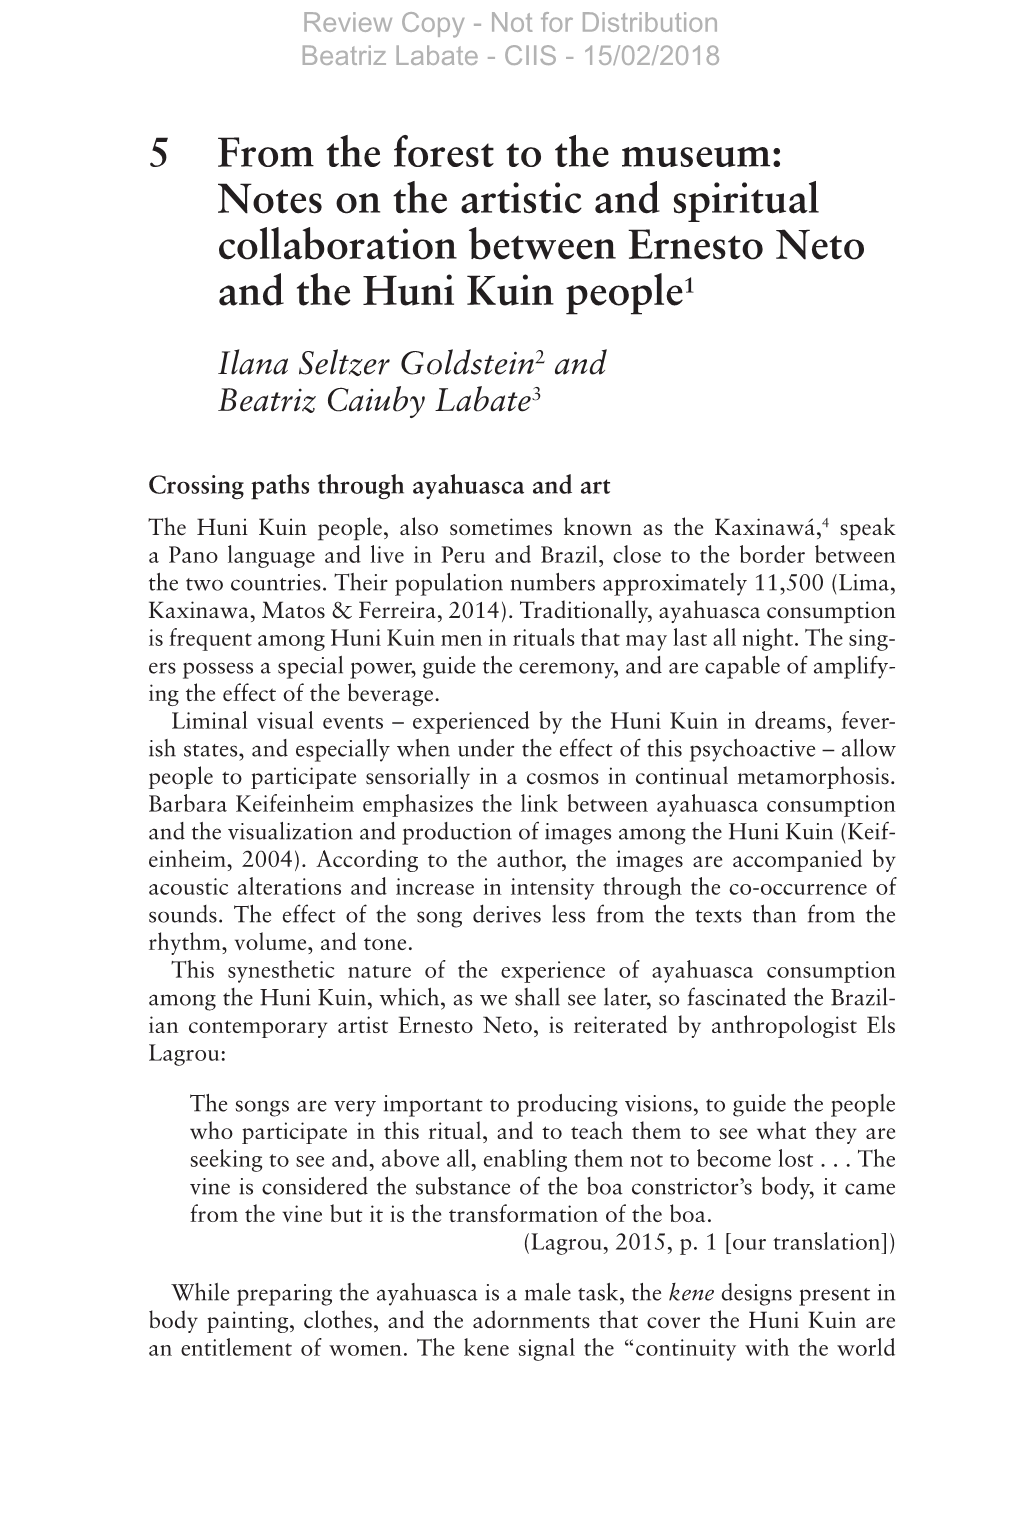 5 from the Forest to the Museum: Notes on the Artistic and Spiritual Collaboration Between Ernesto Neto and the Huni Kuin People1